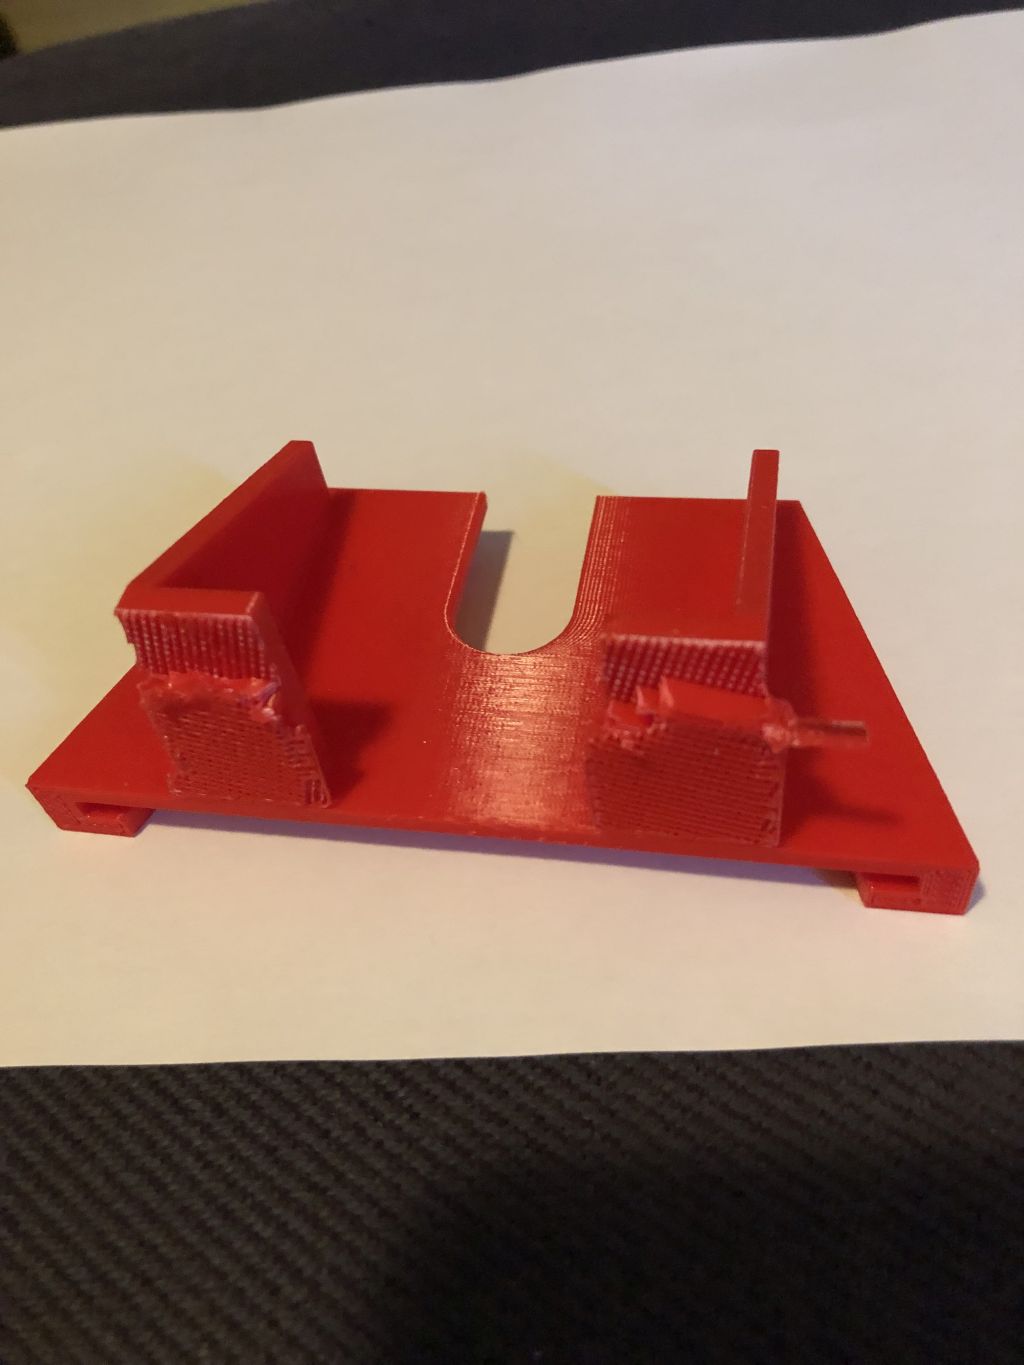 First 3d printed prototype attachment